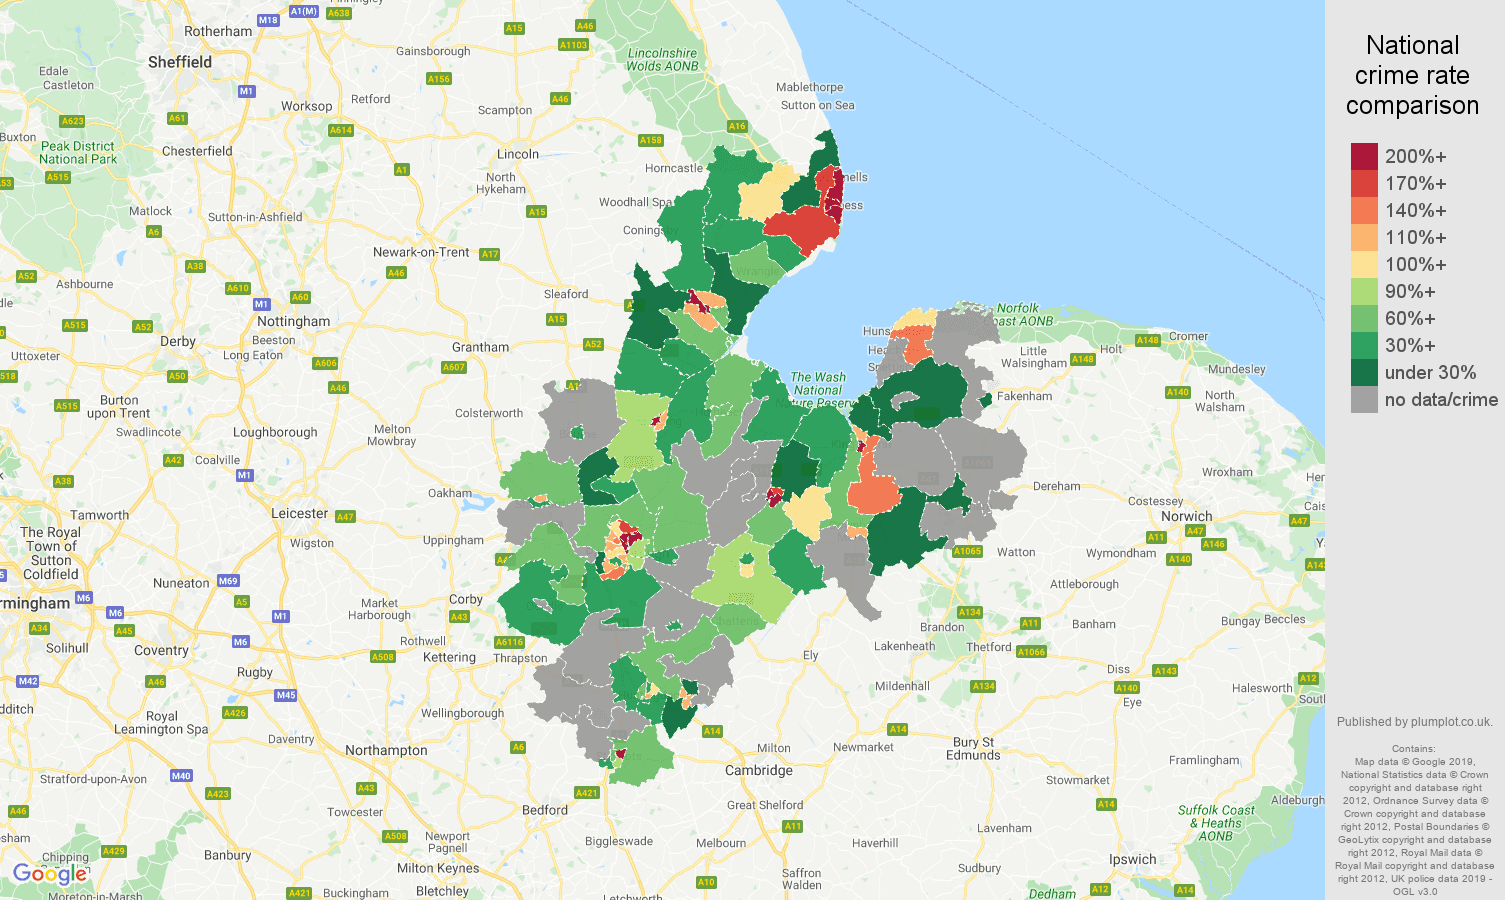 Peterborough possession of weapons crime rate comparison map